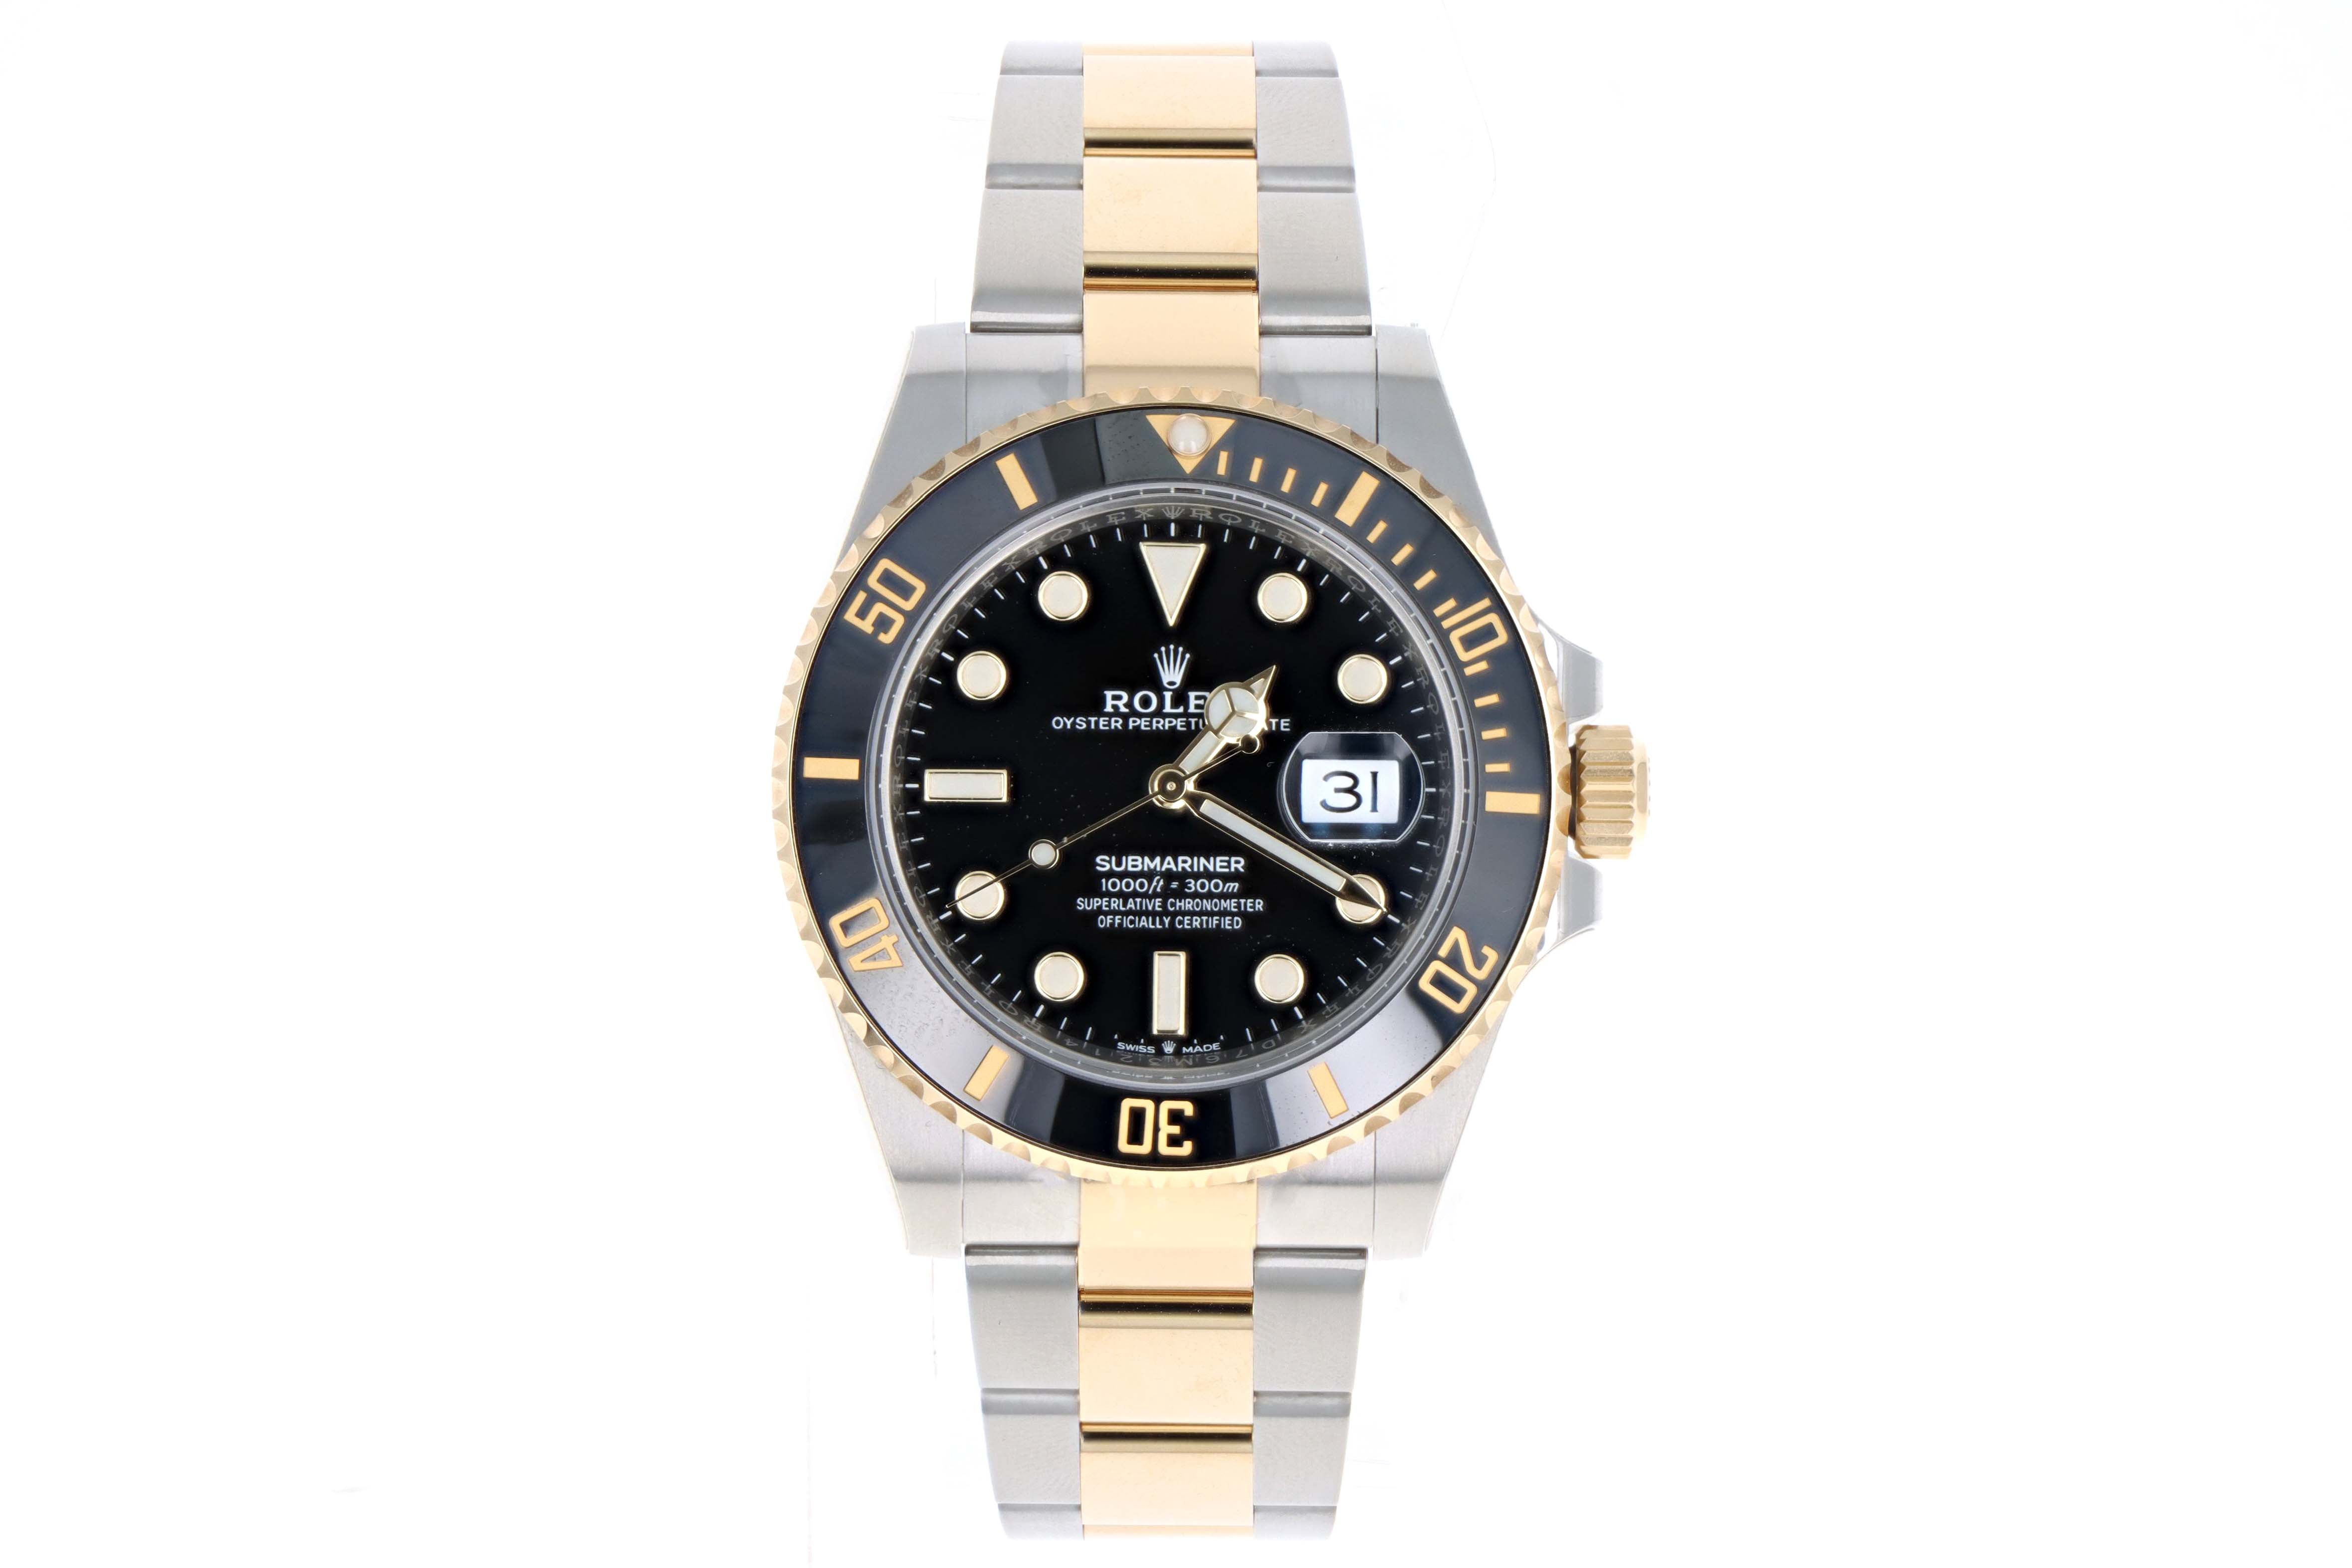 New Rolex Submariner Model 126613 Two Tone Black Dial and Bezel – QUEEN MAY